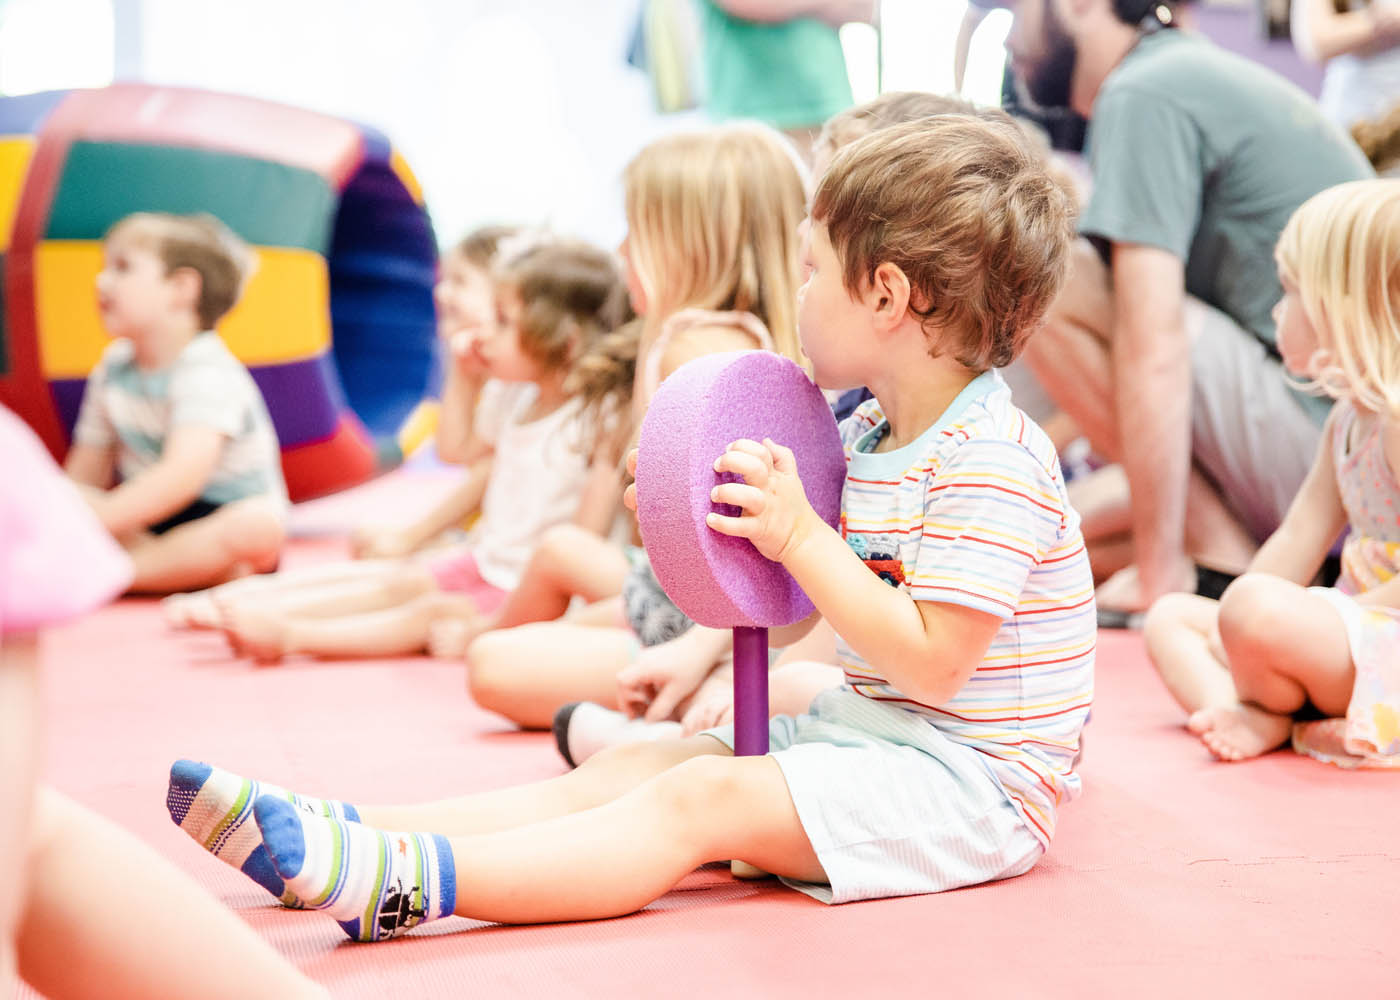 Romp n' Roll Northwest Charlotte baby and toddler classes in Charlotte, NC offers mixed age classes.